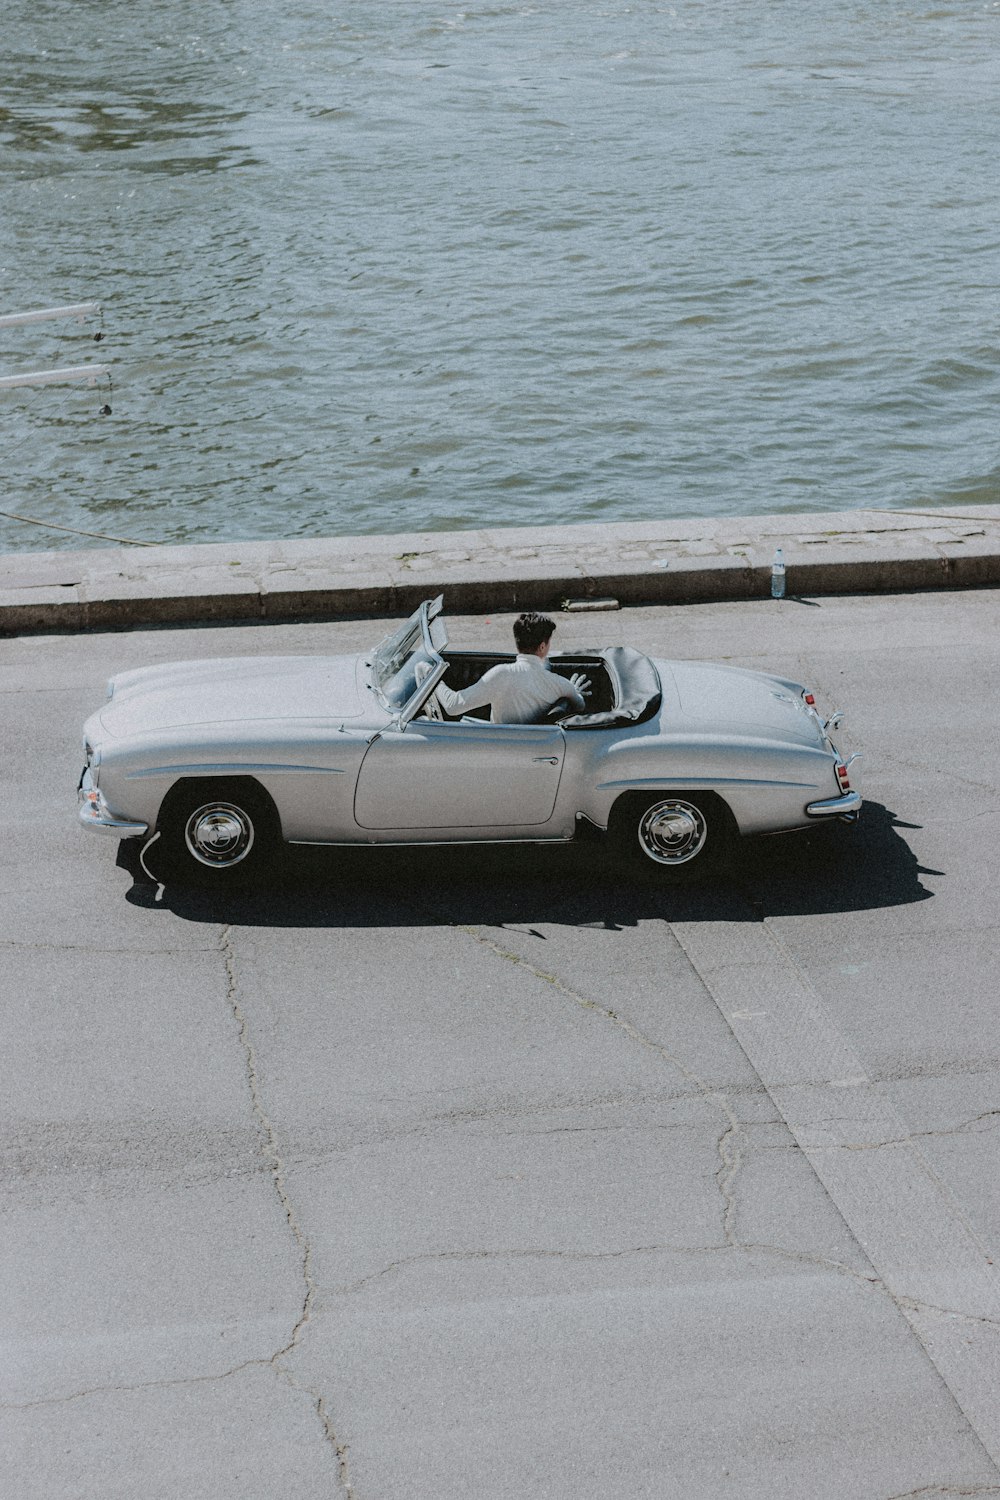 white convertible car parked on gray concrete pavement near body of water during daytime